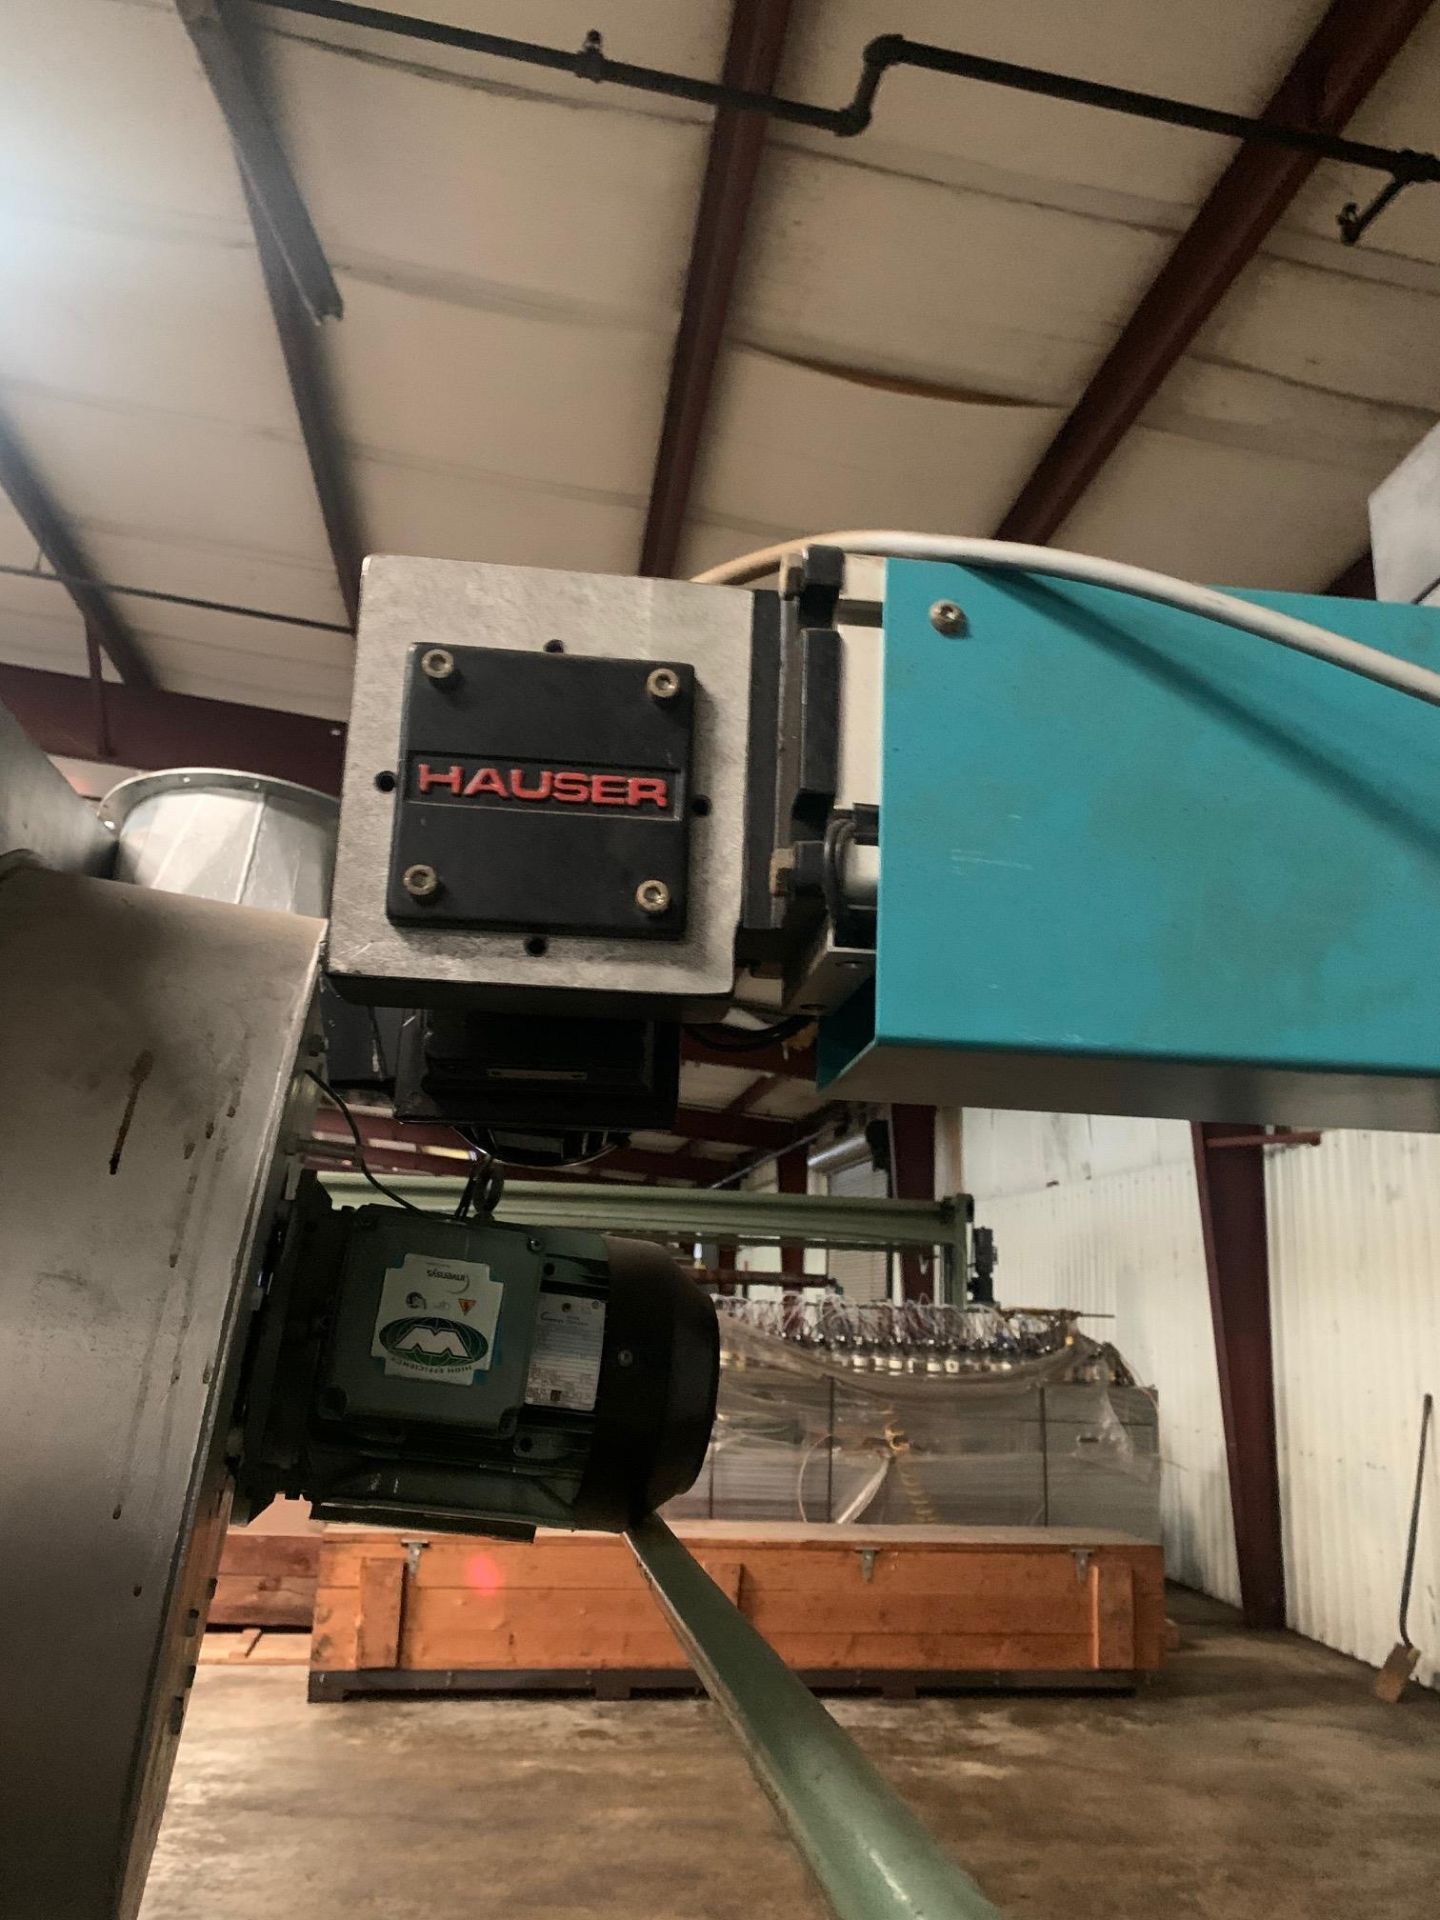 Hauser. Model Comtac 3000 Automatic Cut Panels and Stacking System, Rigging Fee: $150 - Image 11 of 11